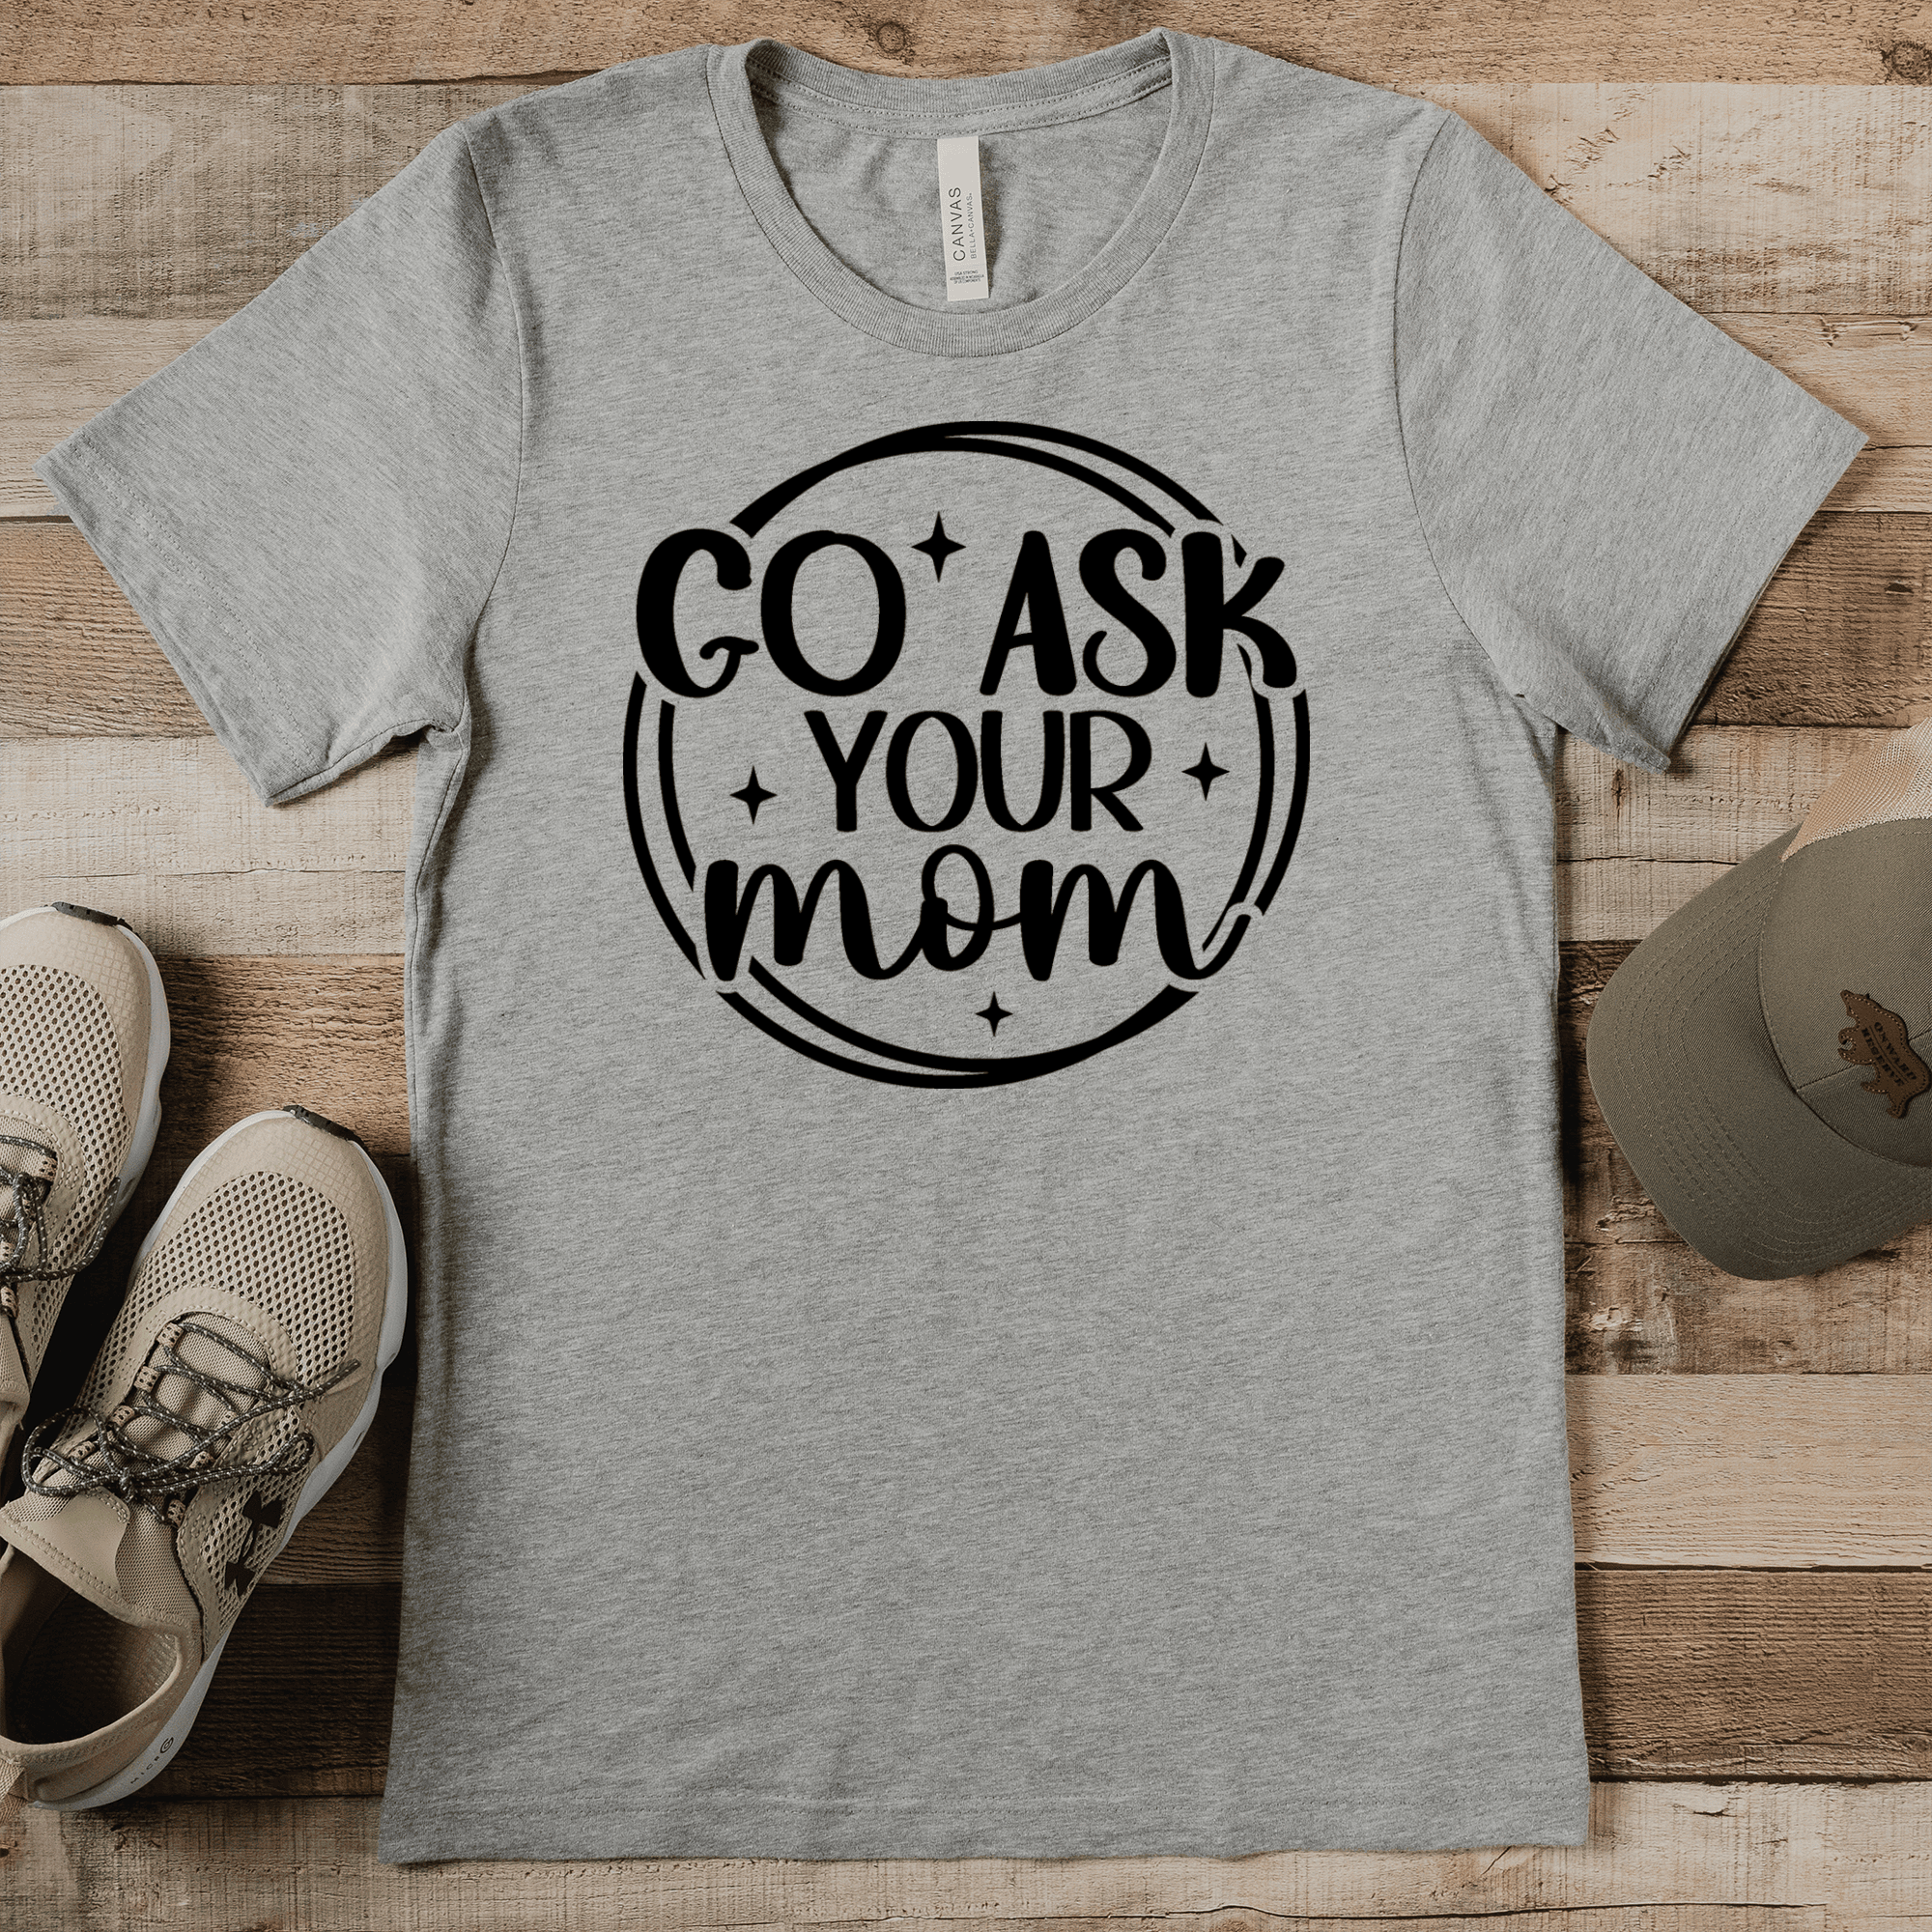 Grey Mens T-Shirt With Ask Your Mom Design